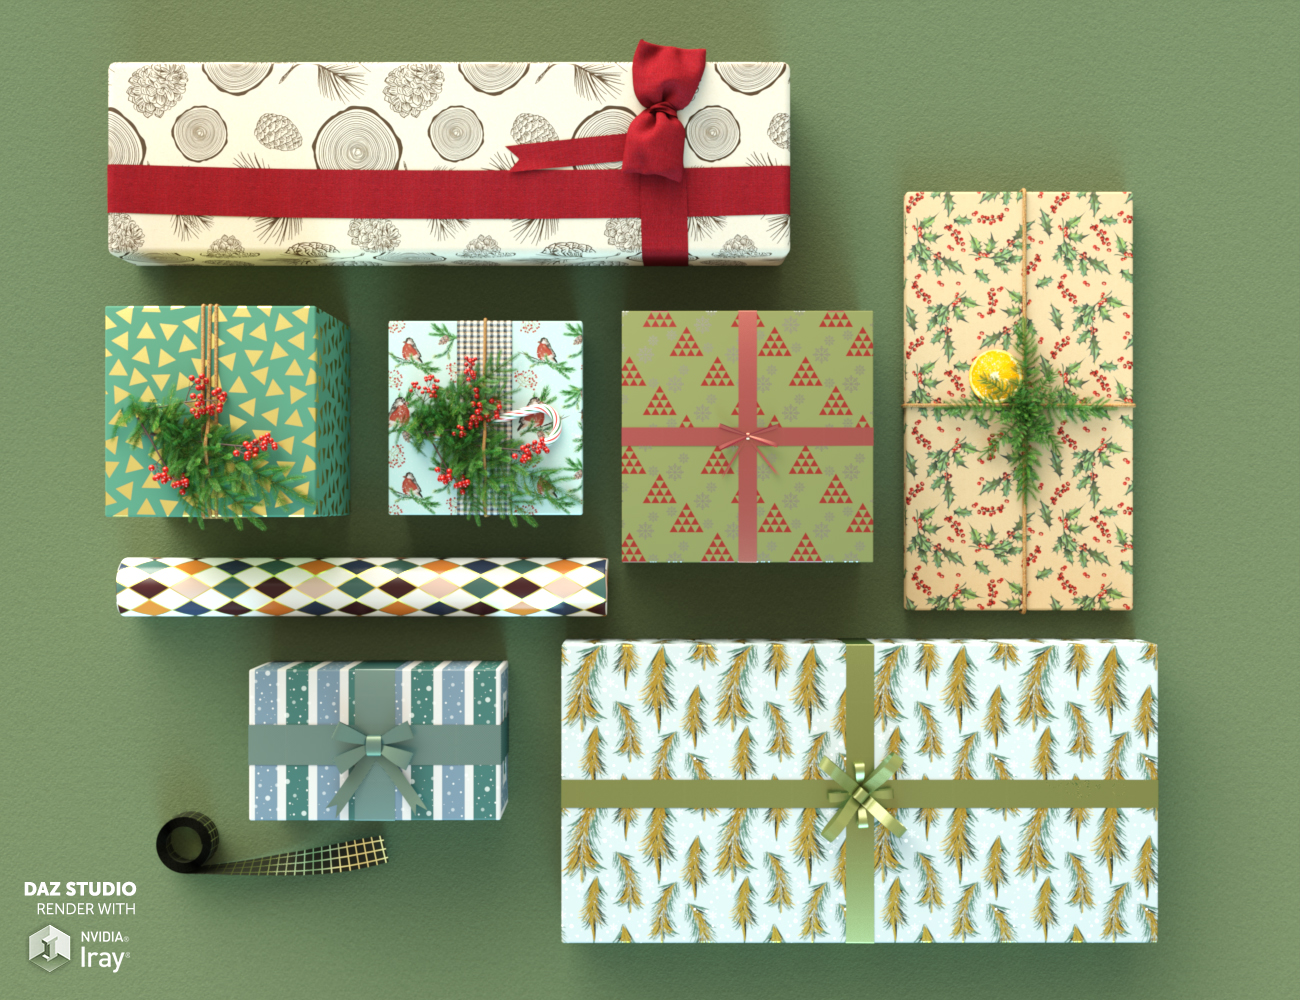 Wrapping Paper: Christmas II by: Dimidrol, 3D Models by Daz 3D